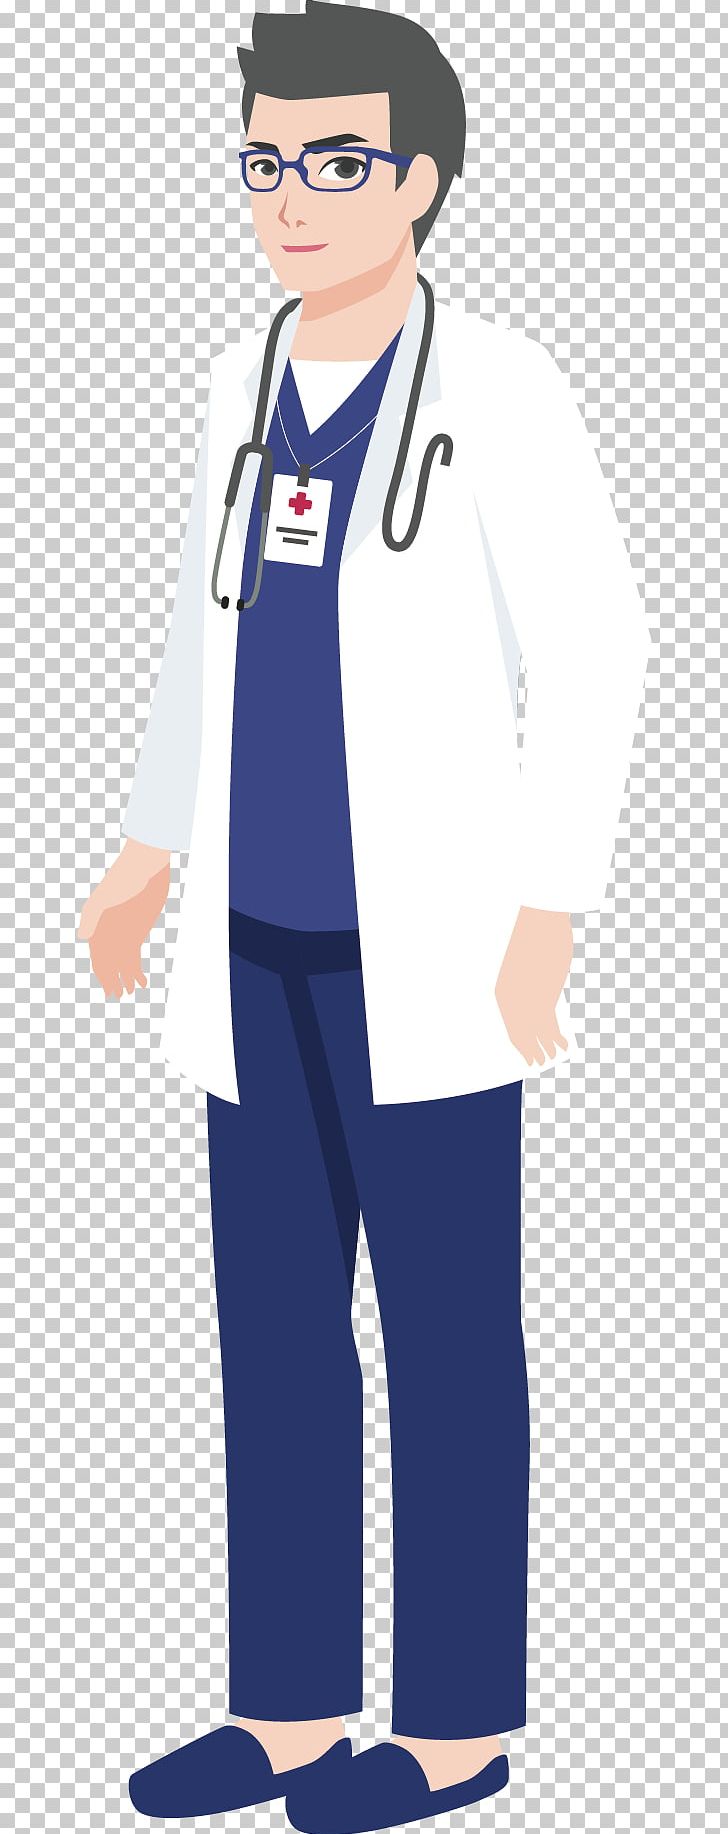 Cartoon Physician Illustration PNG, Clipart, Anime Doctor, Chinese Lantern, Chinese Style, Encapsulated Postscript, Fictional Character Free PNG Download